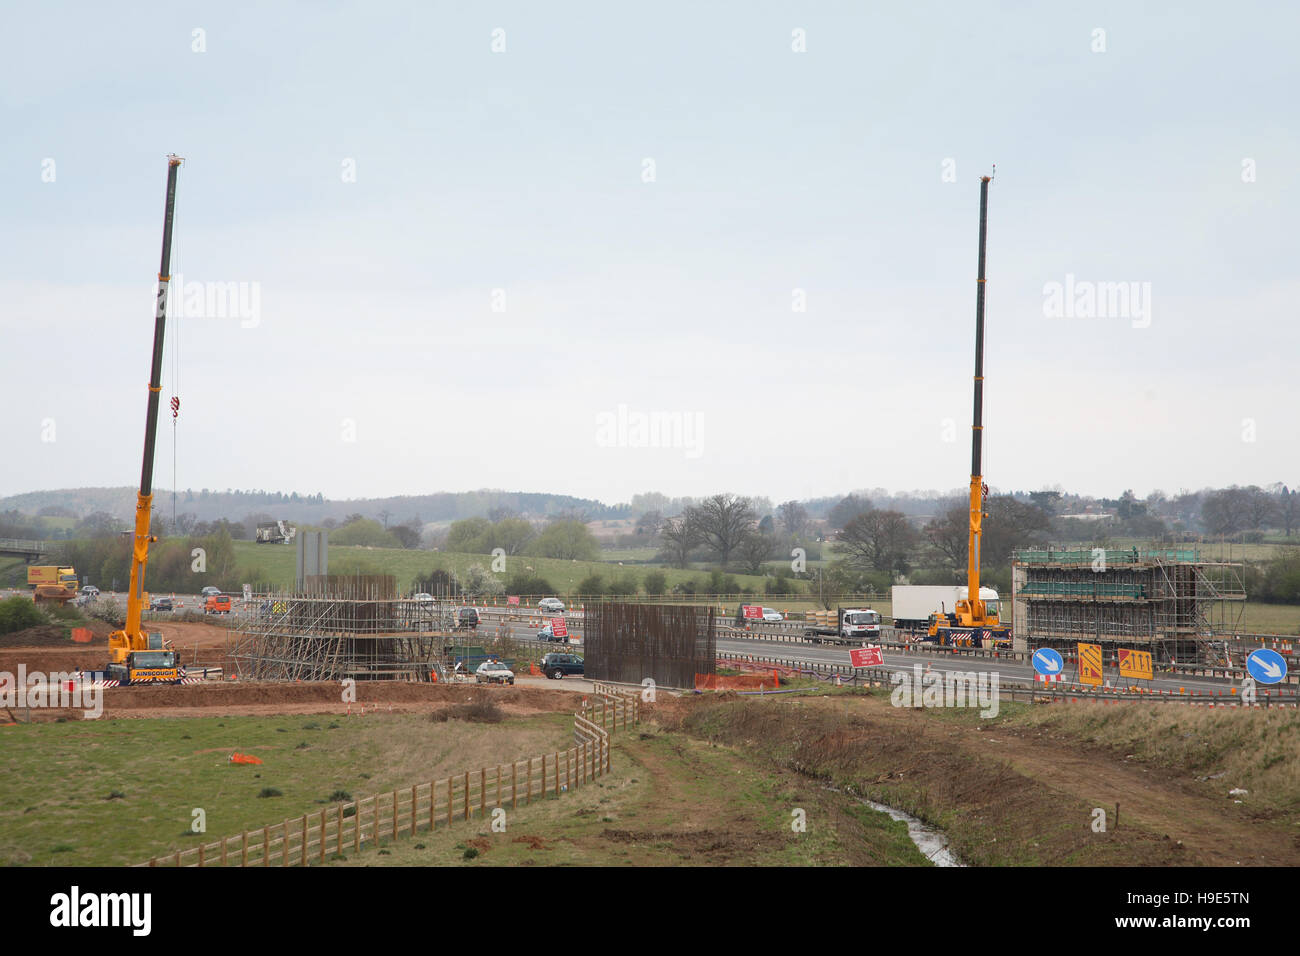 Construction of a new bridge for the A46 to span the M40 motorway, Oxfordshire, UK. Shows formwork for bridge piers and 2 cranes Stock Photo